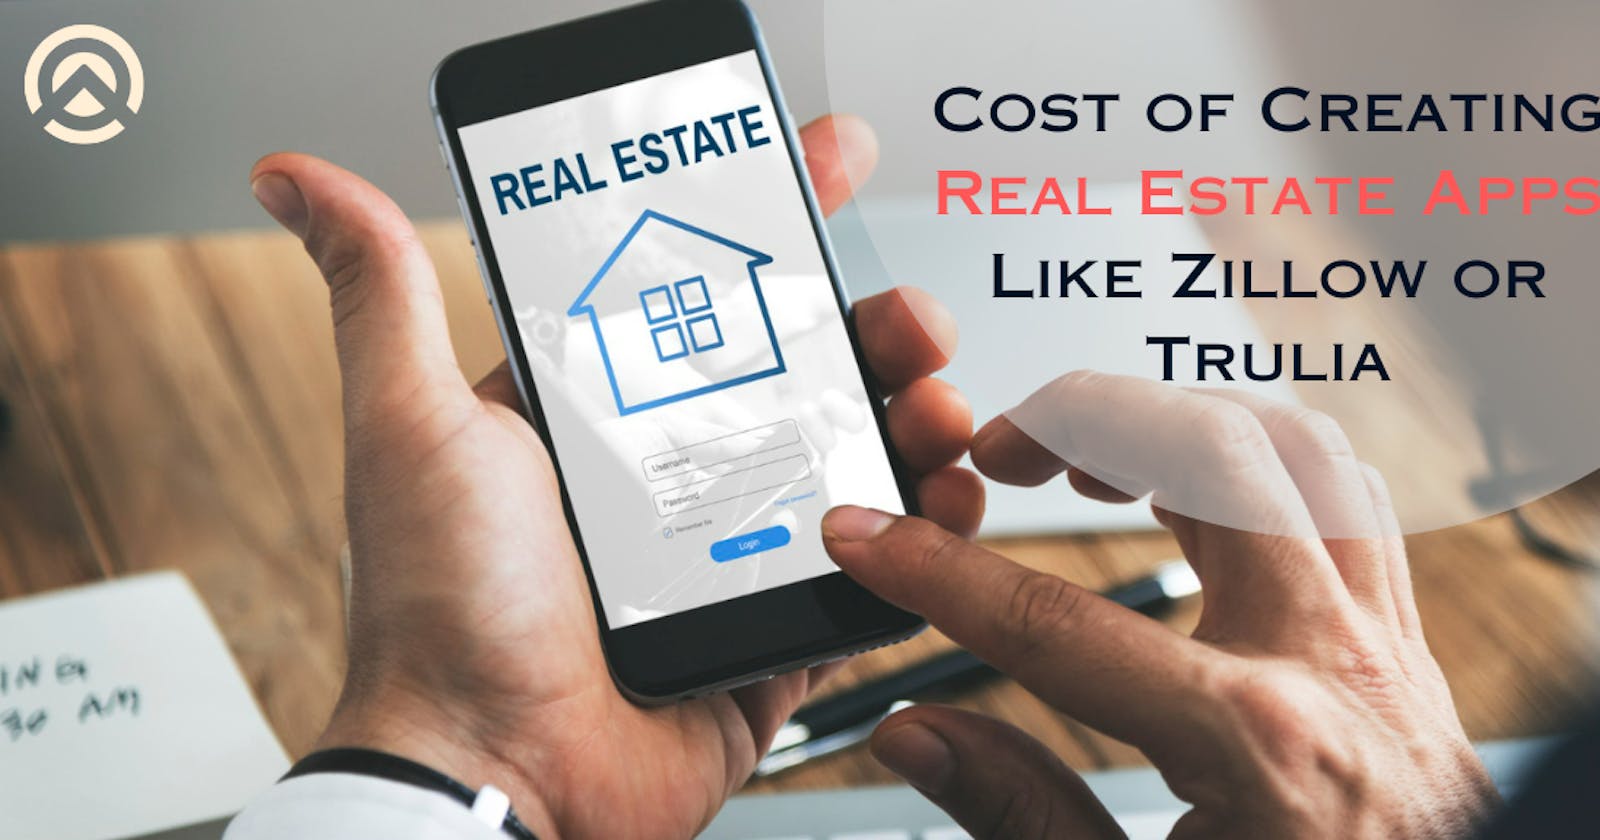 Cost of Creating Real Estate Apps Like Zillow or Trulia